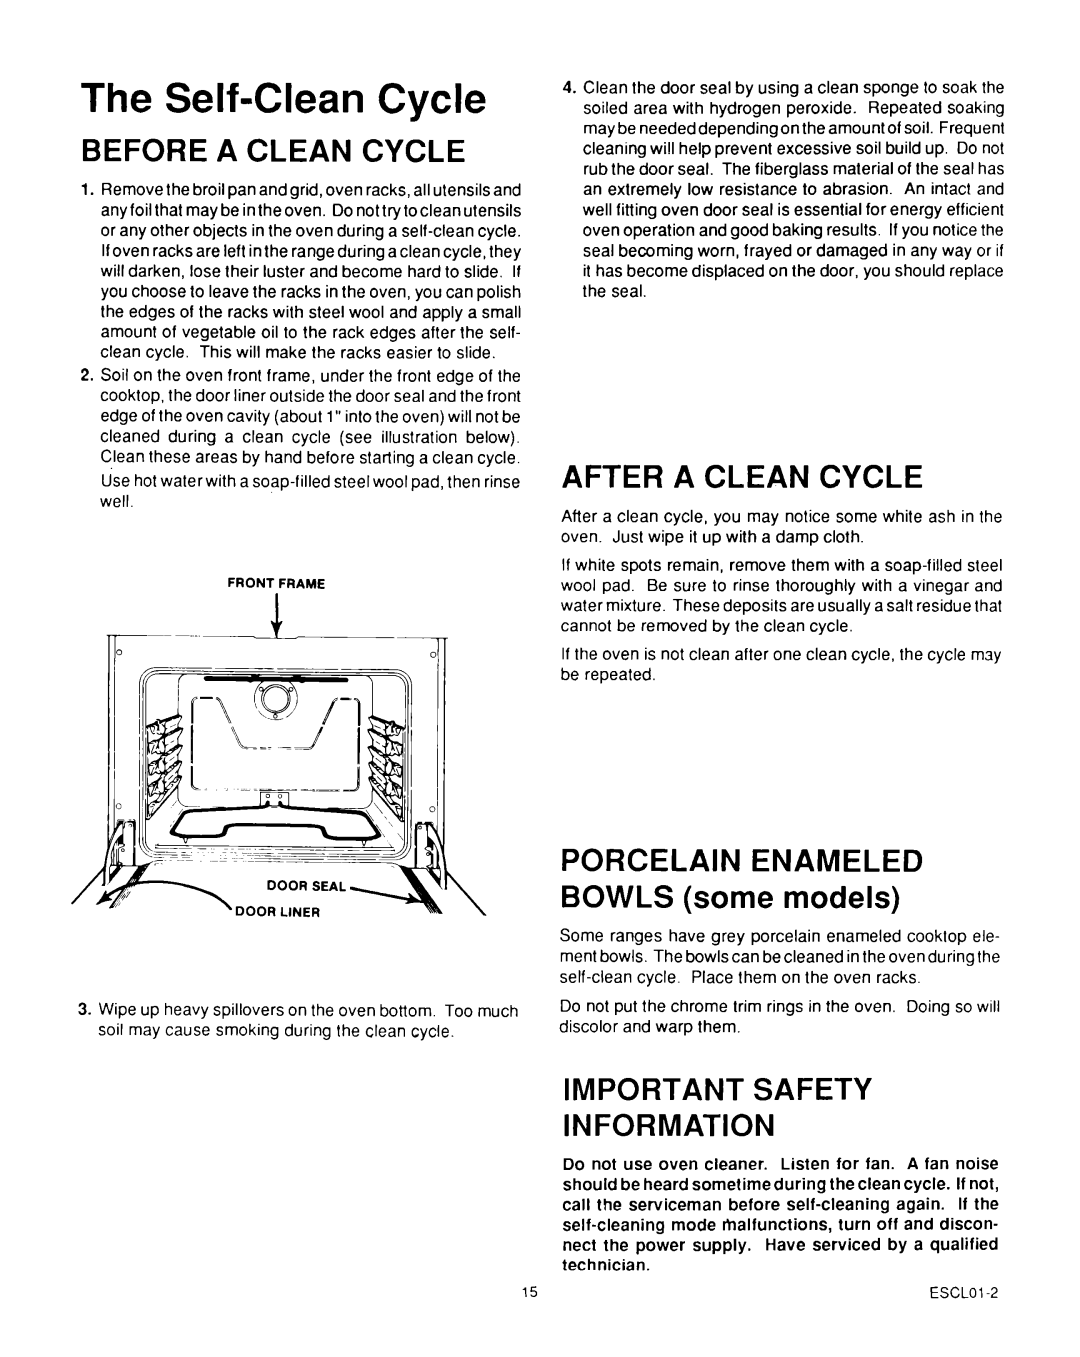 Roper D975 owner manual The Self-CleanCycle, Before A Clean Cycle, After A Clean Cycle, Important Safety Information 